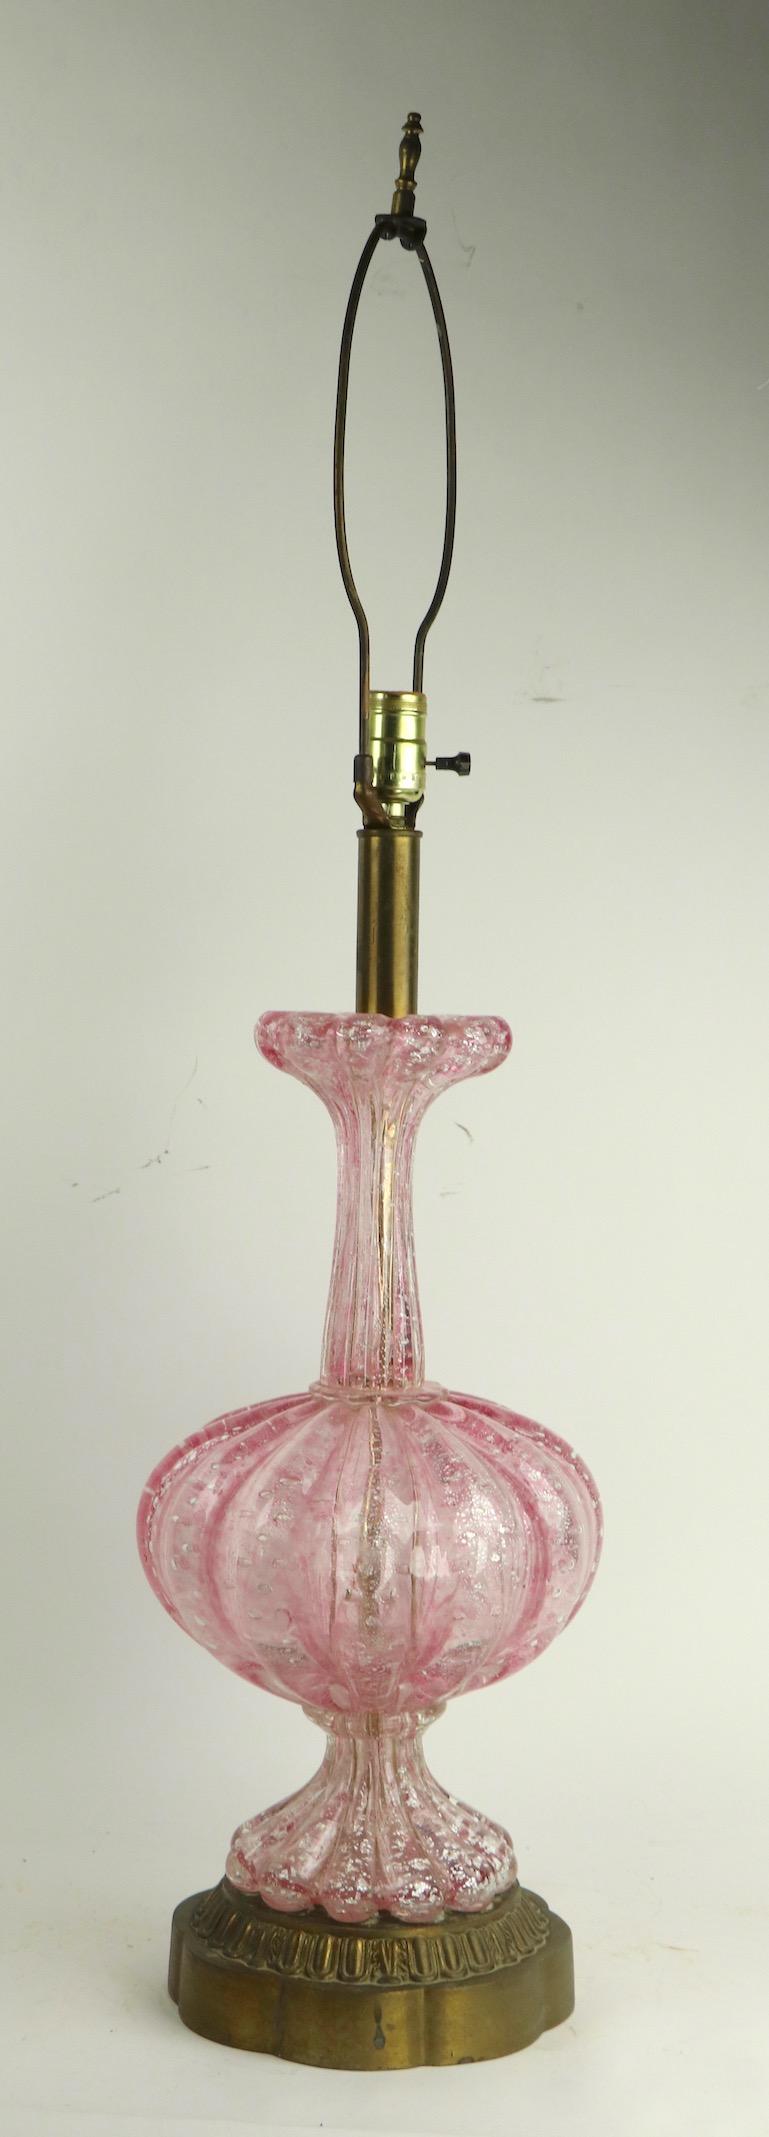 Classic Italian Murano art glass table lamp by Barovier. This example has a clear and pink glass body with silver foil flake inclusions. The lamp is in very fine, original and working condition, showing only light cosmetic wear to metal fitments as